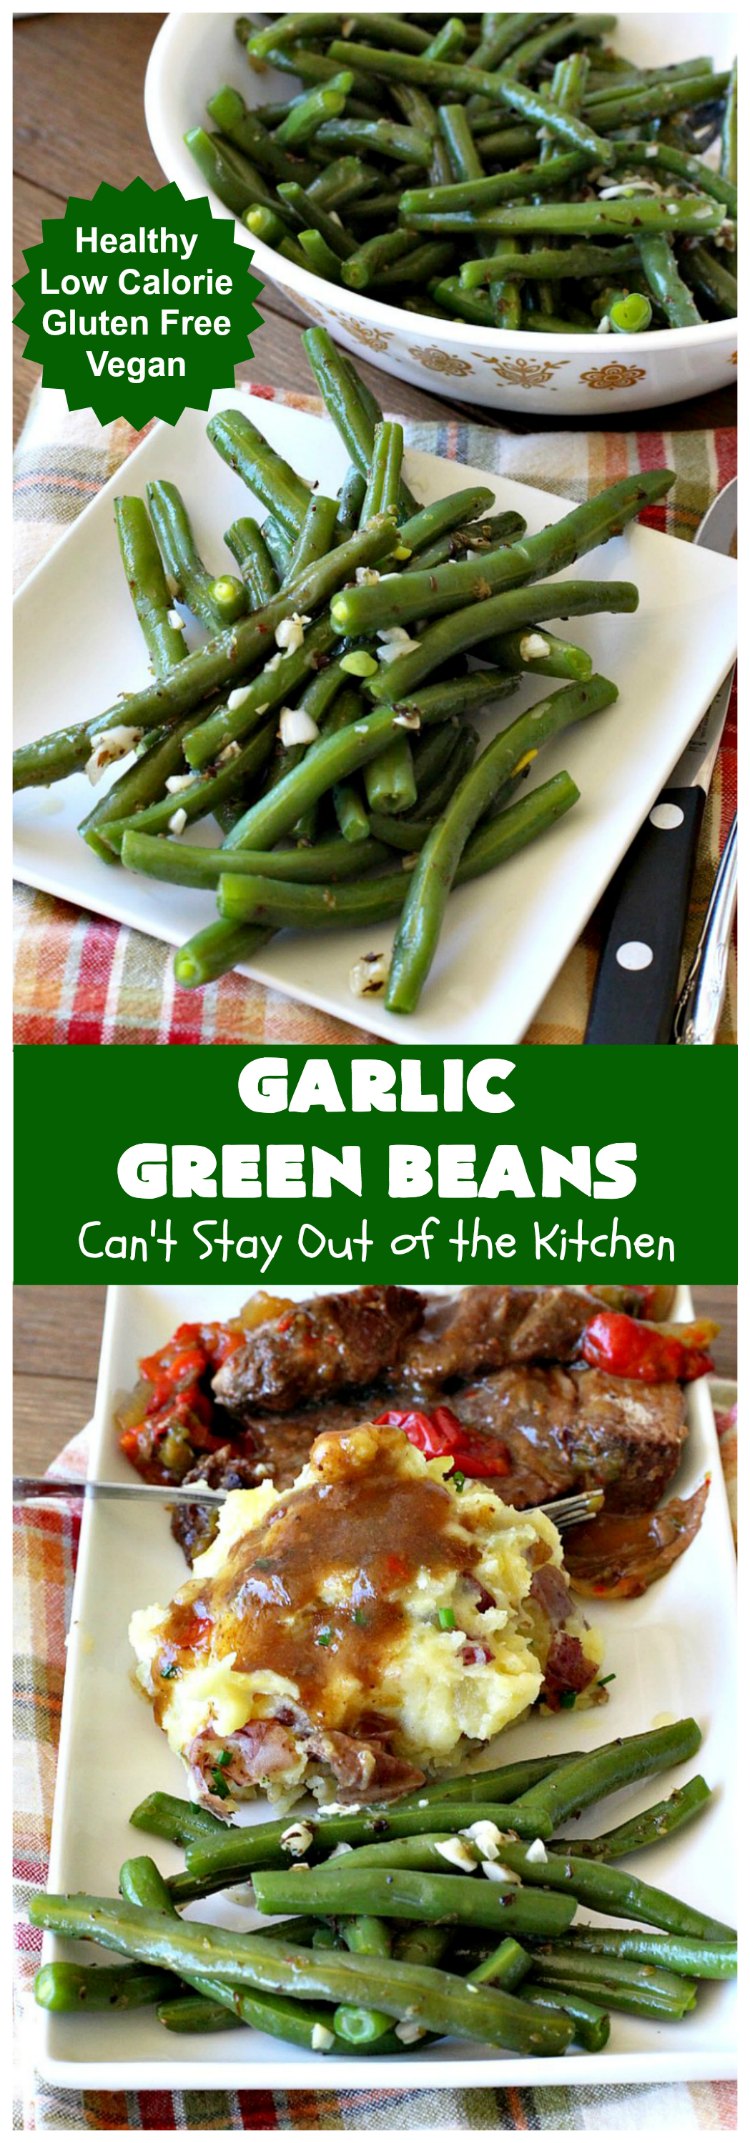 Garlic Green Beans | Can't Stay Out of the Kitchen | this quick & easy #GreenBeans #SideDish can be ready to serve in about 15 minutes! Wonderful for family or company dinners. #Healthy, #vegan #LowCalorie & #GlutenFree. #GarlicGreenBeans #GreenBeansSideDish